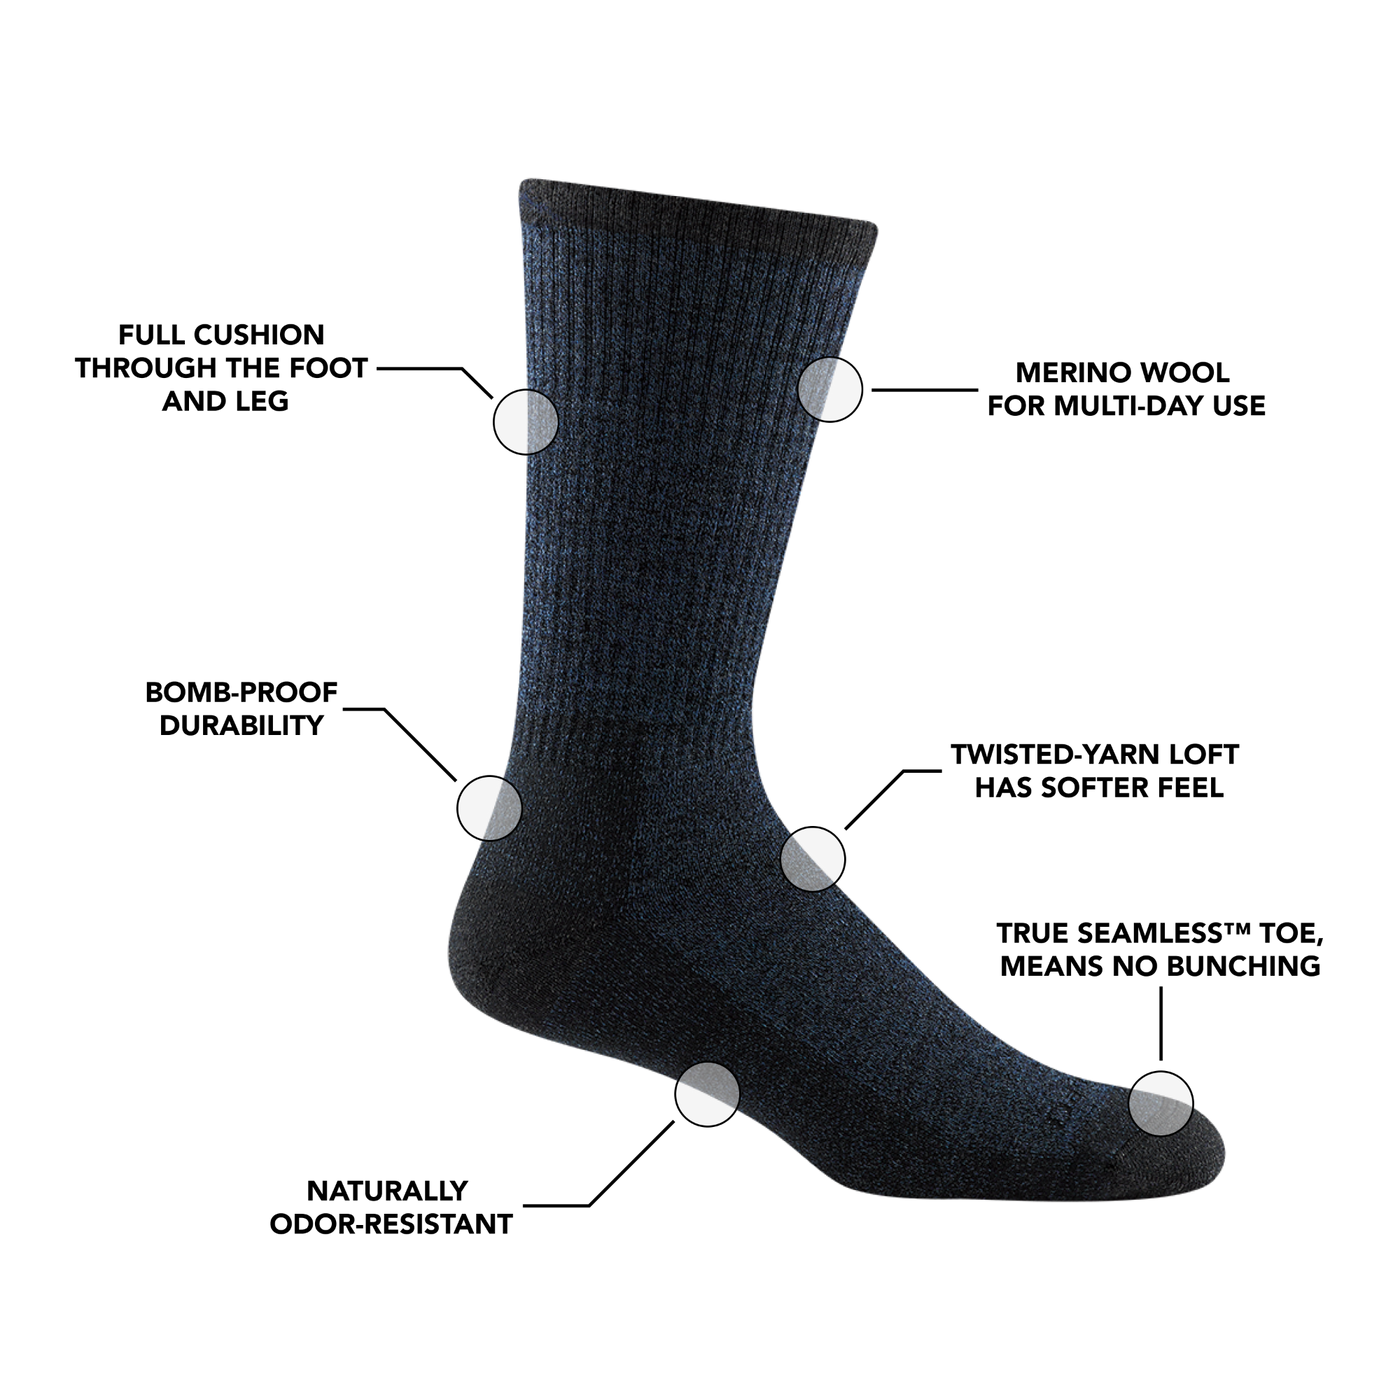 Image of Men's Nomad Boot Sock in Denim calling out all of the features and benefits